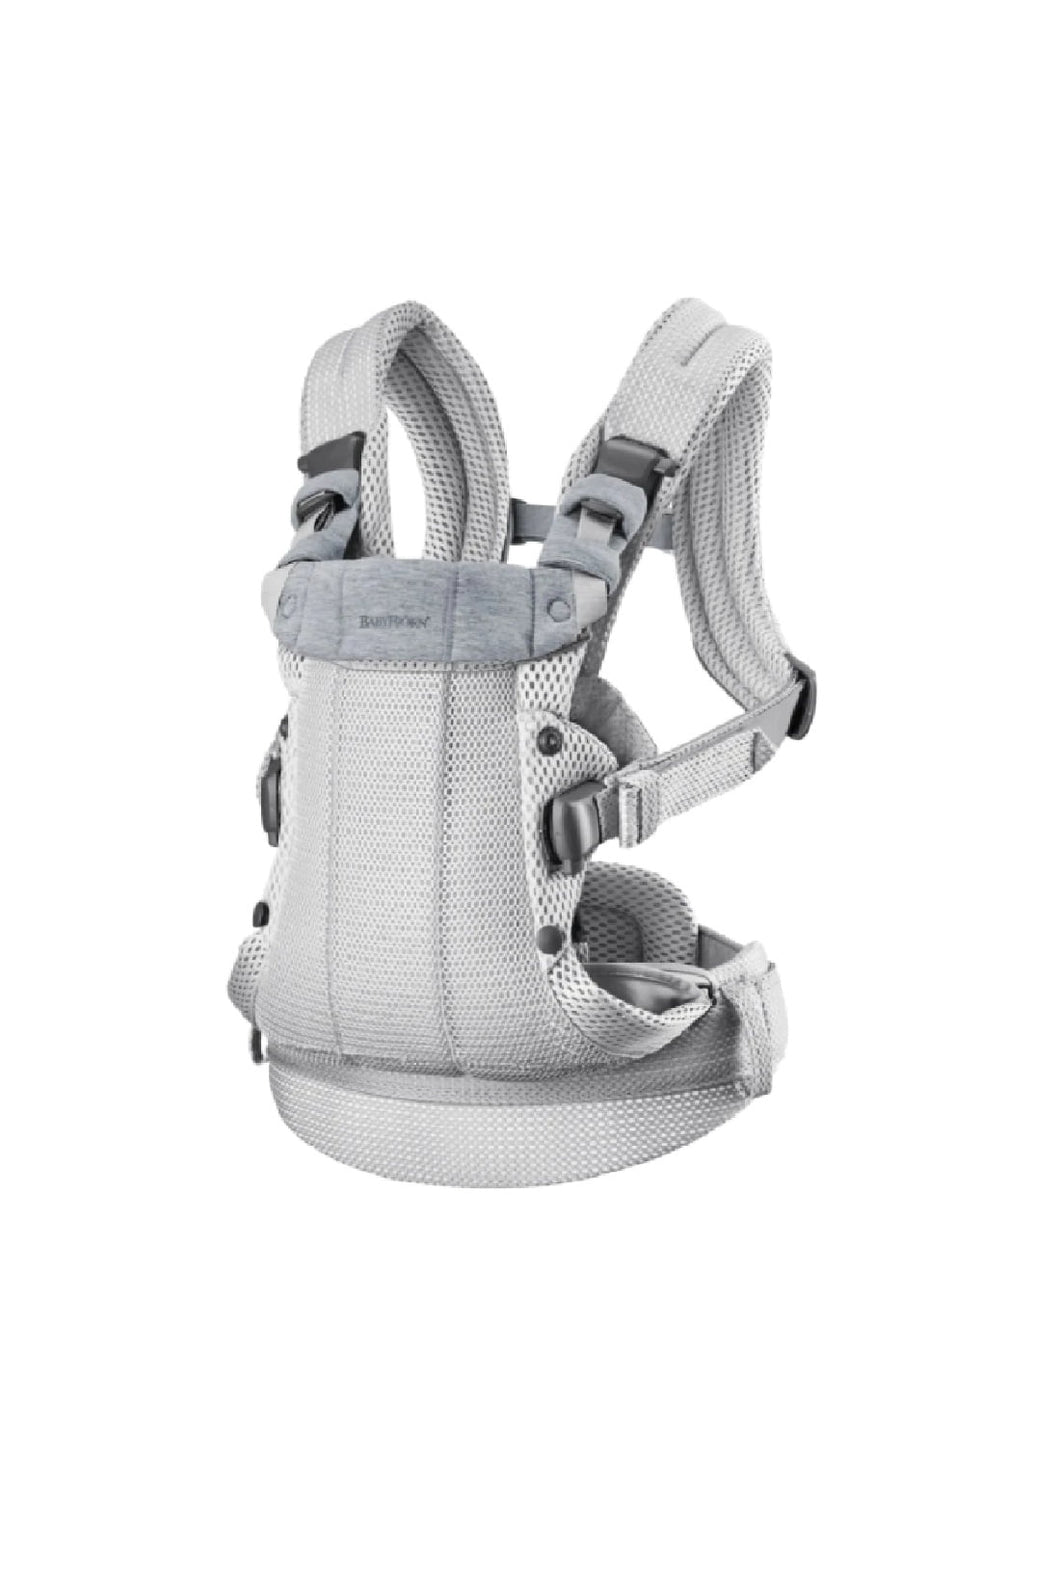 Babybjorn Baby Carrier Harmony Silver 3D Mesh 1